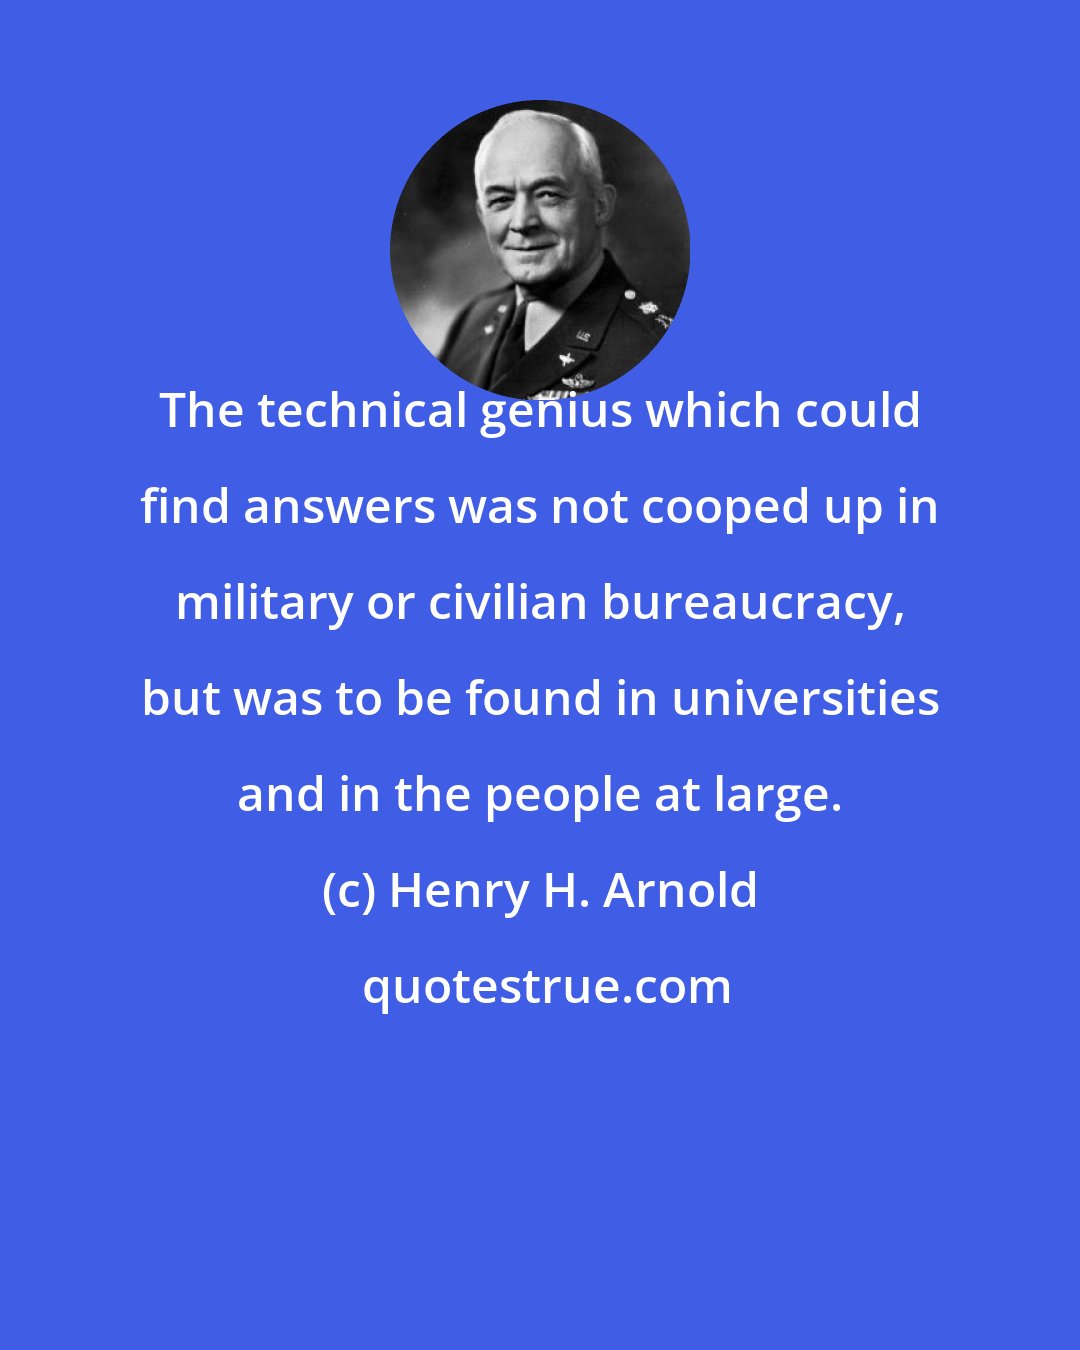 Henry H. Arnold: The technical genius which could find answers was not cooped up in military or civilian bureaucracy, but was to be found in universities and in the people at large.